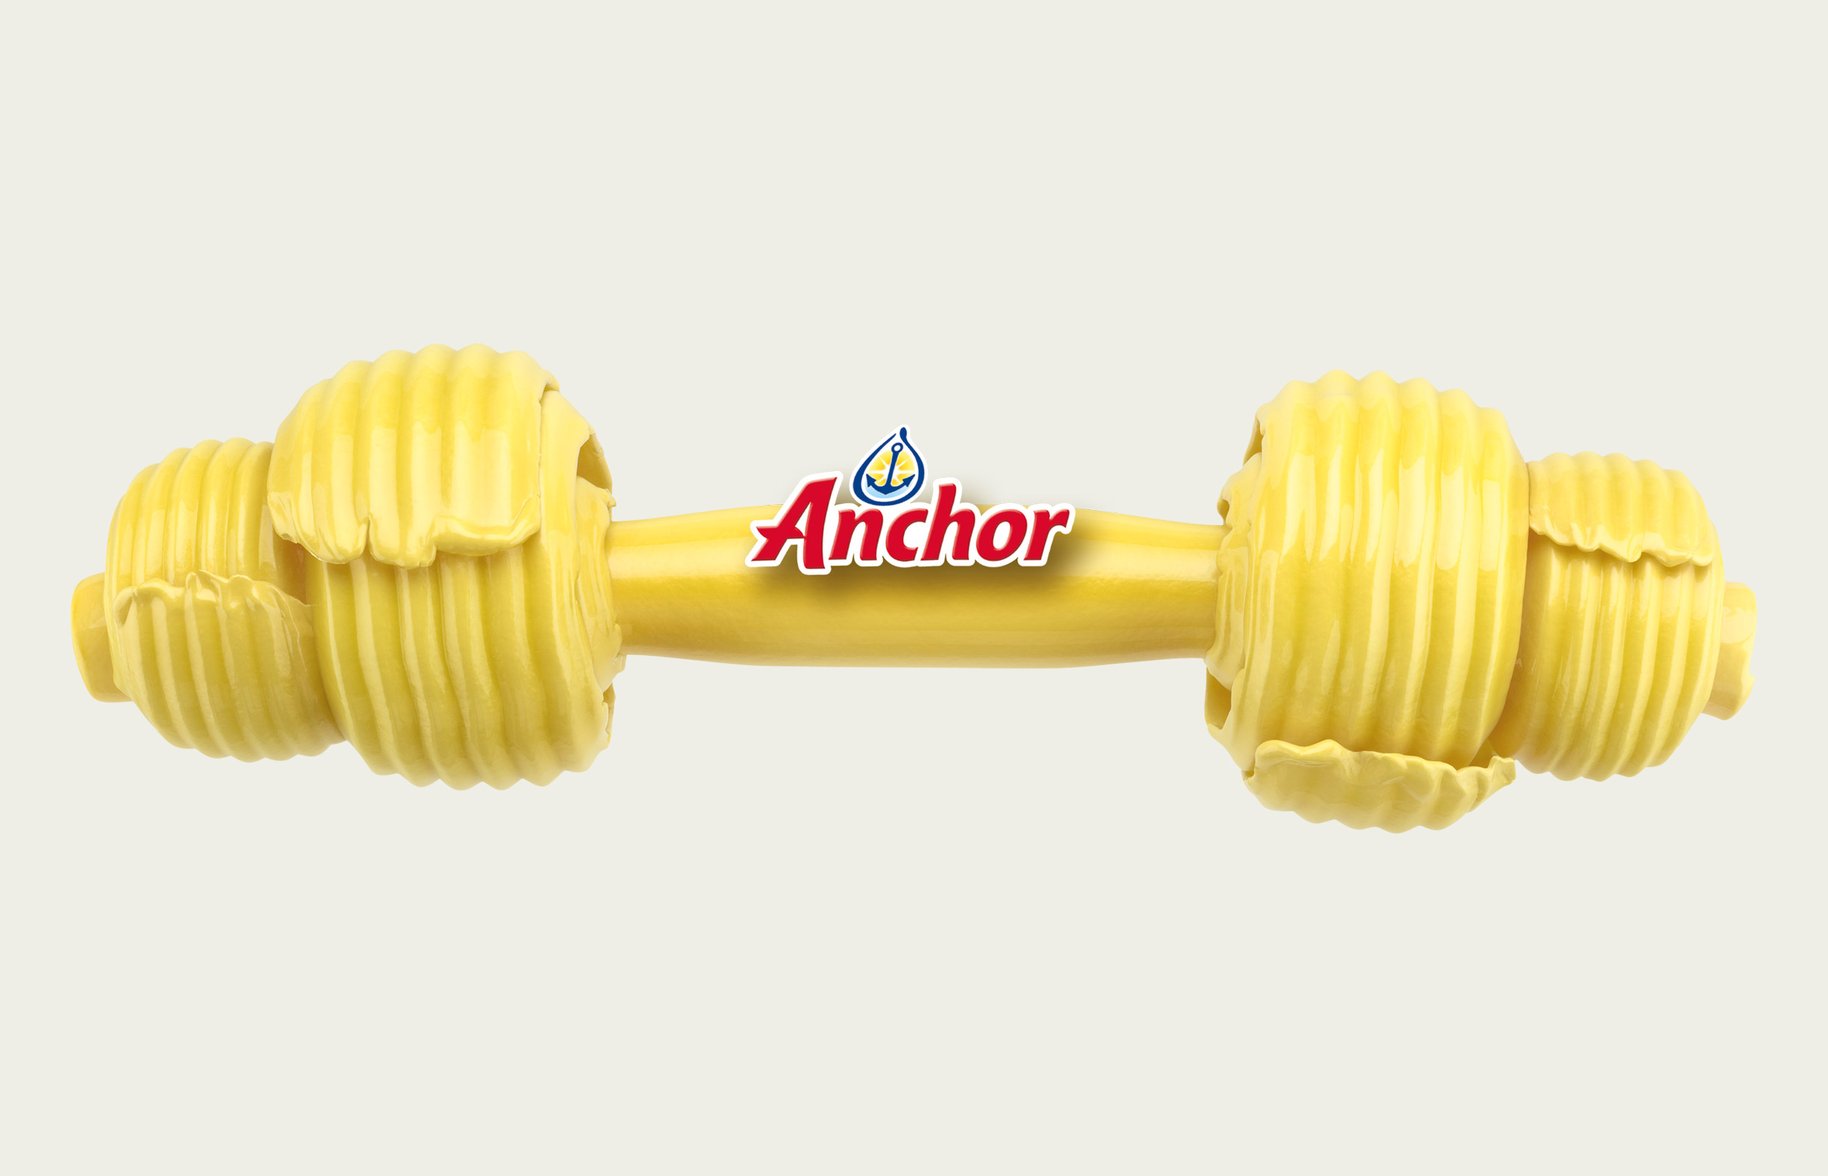 Anchor Export Strong, Healthy Kids weights butter render